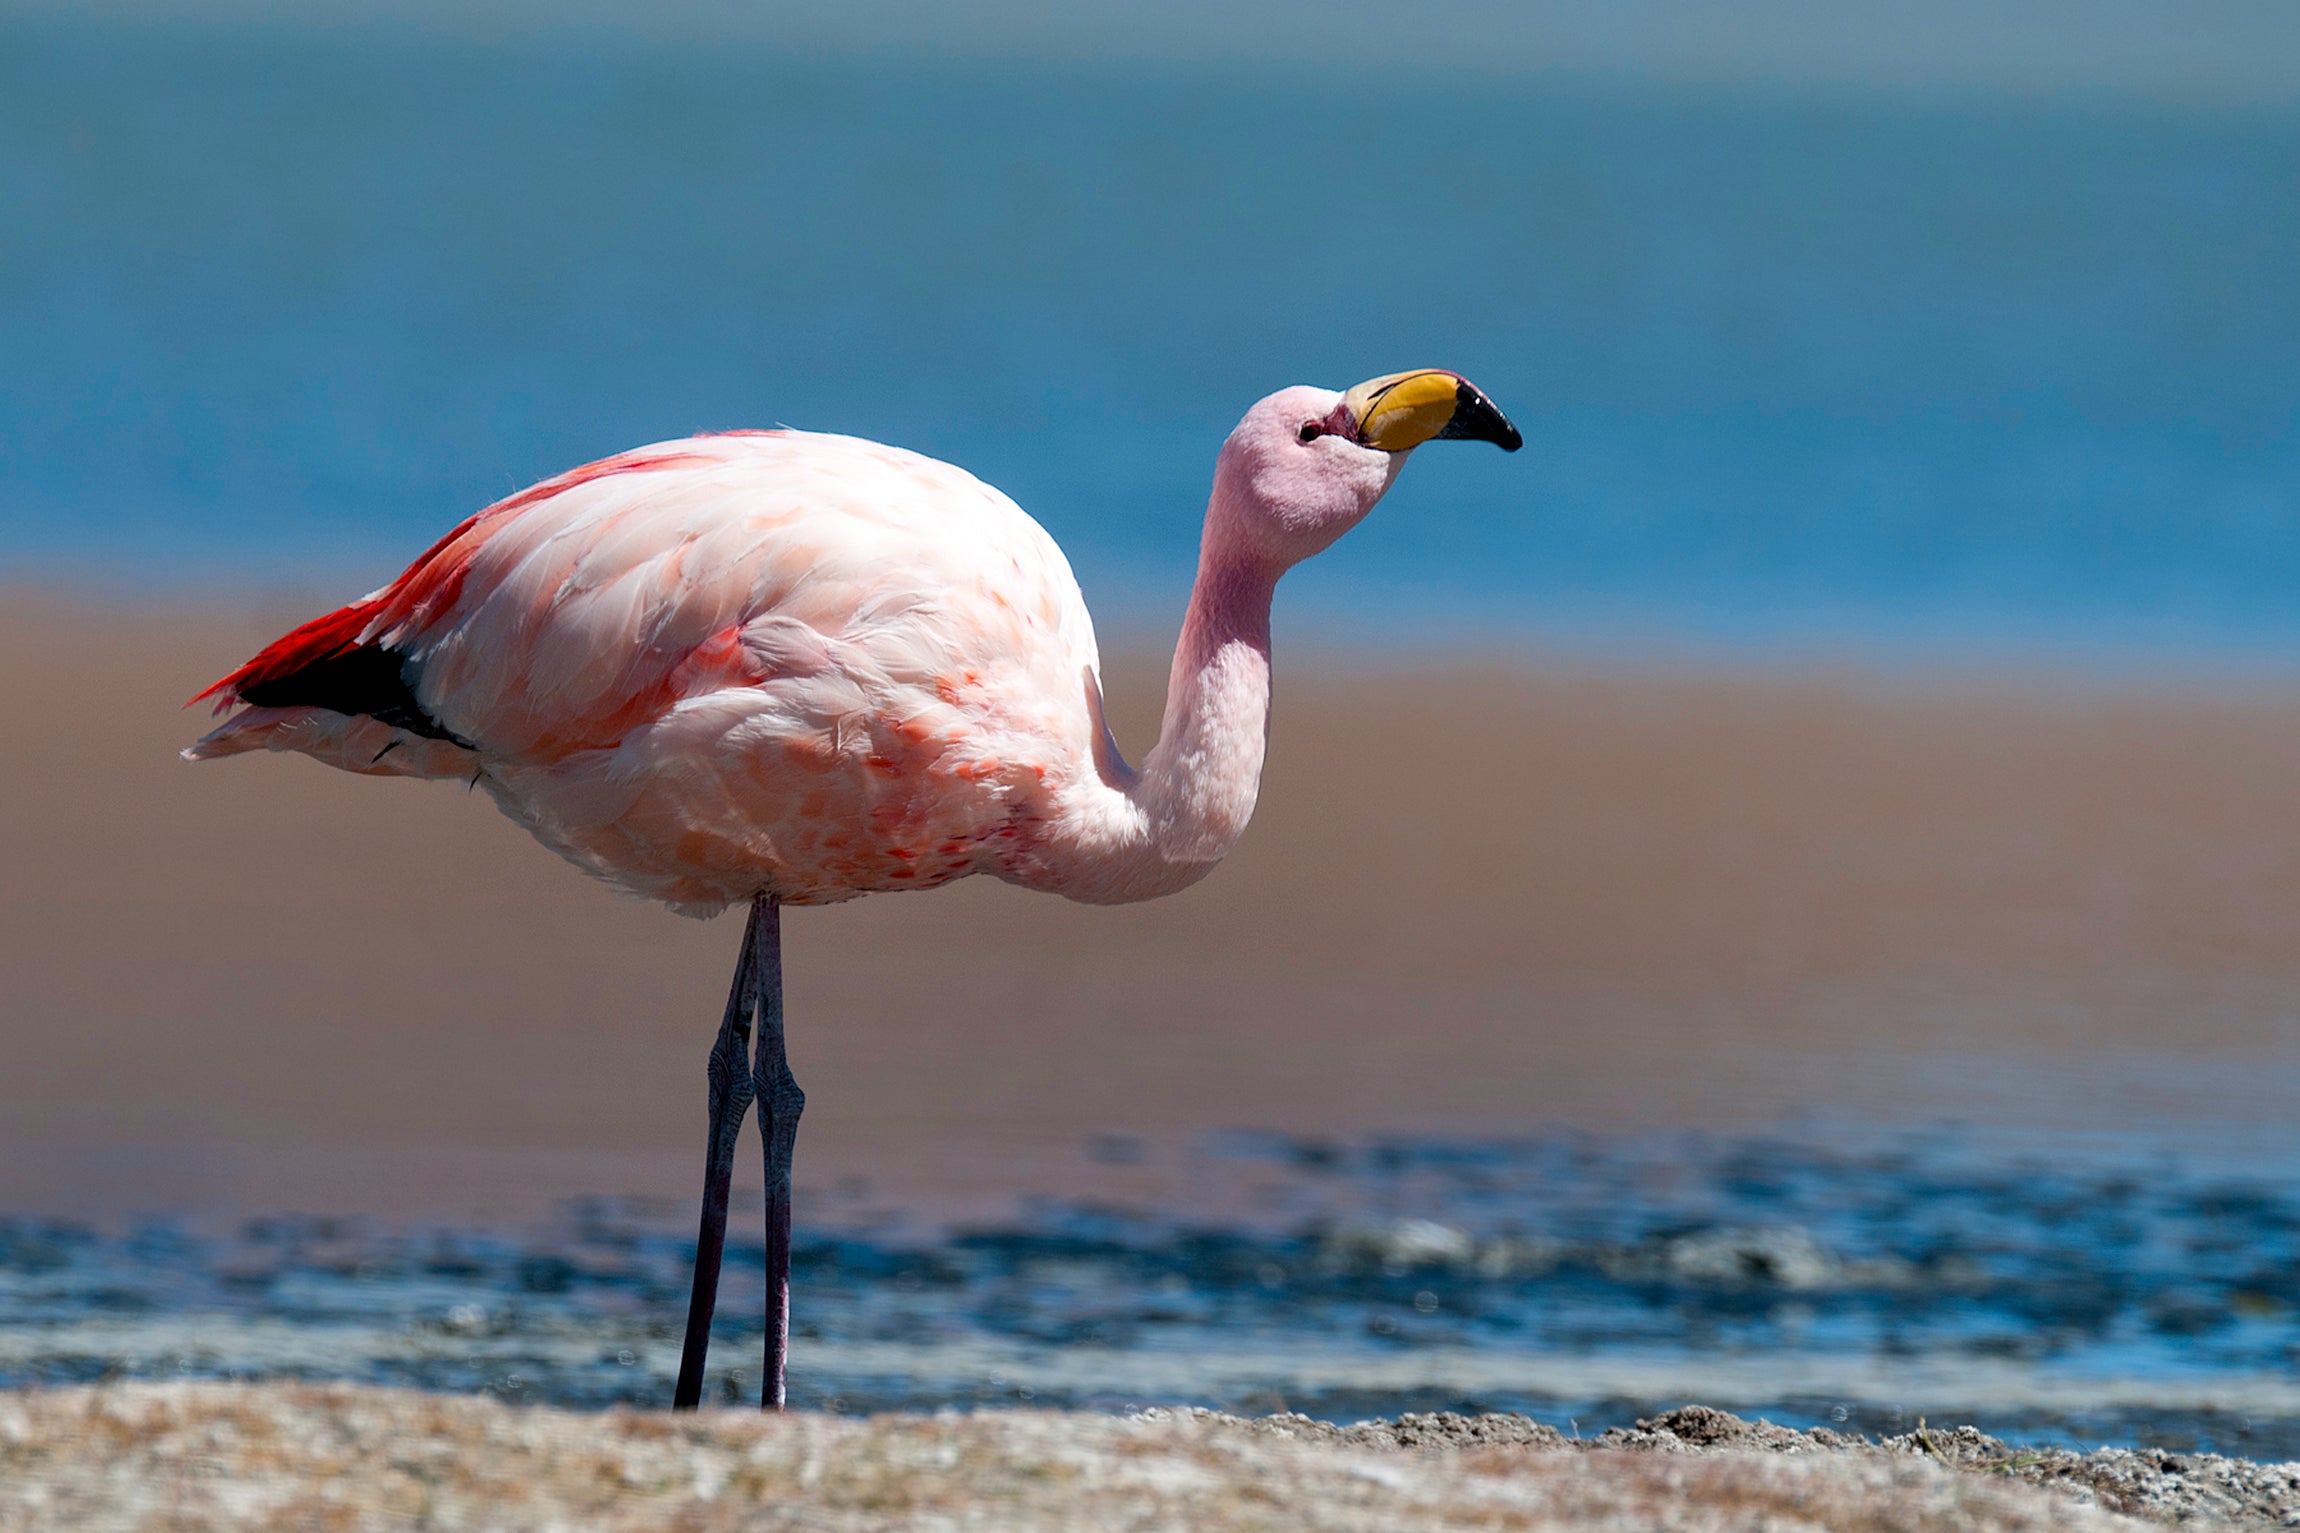 The Andean Flamingo is listed as ‘vulnerable’ on the IUCN red list